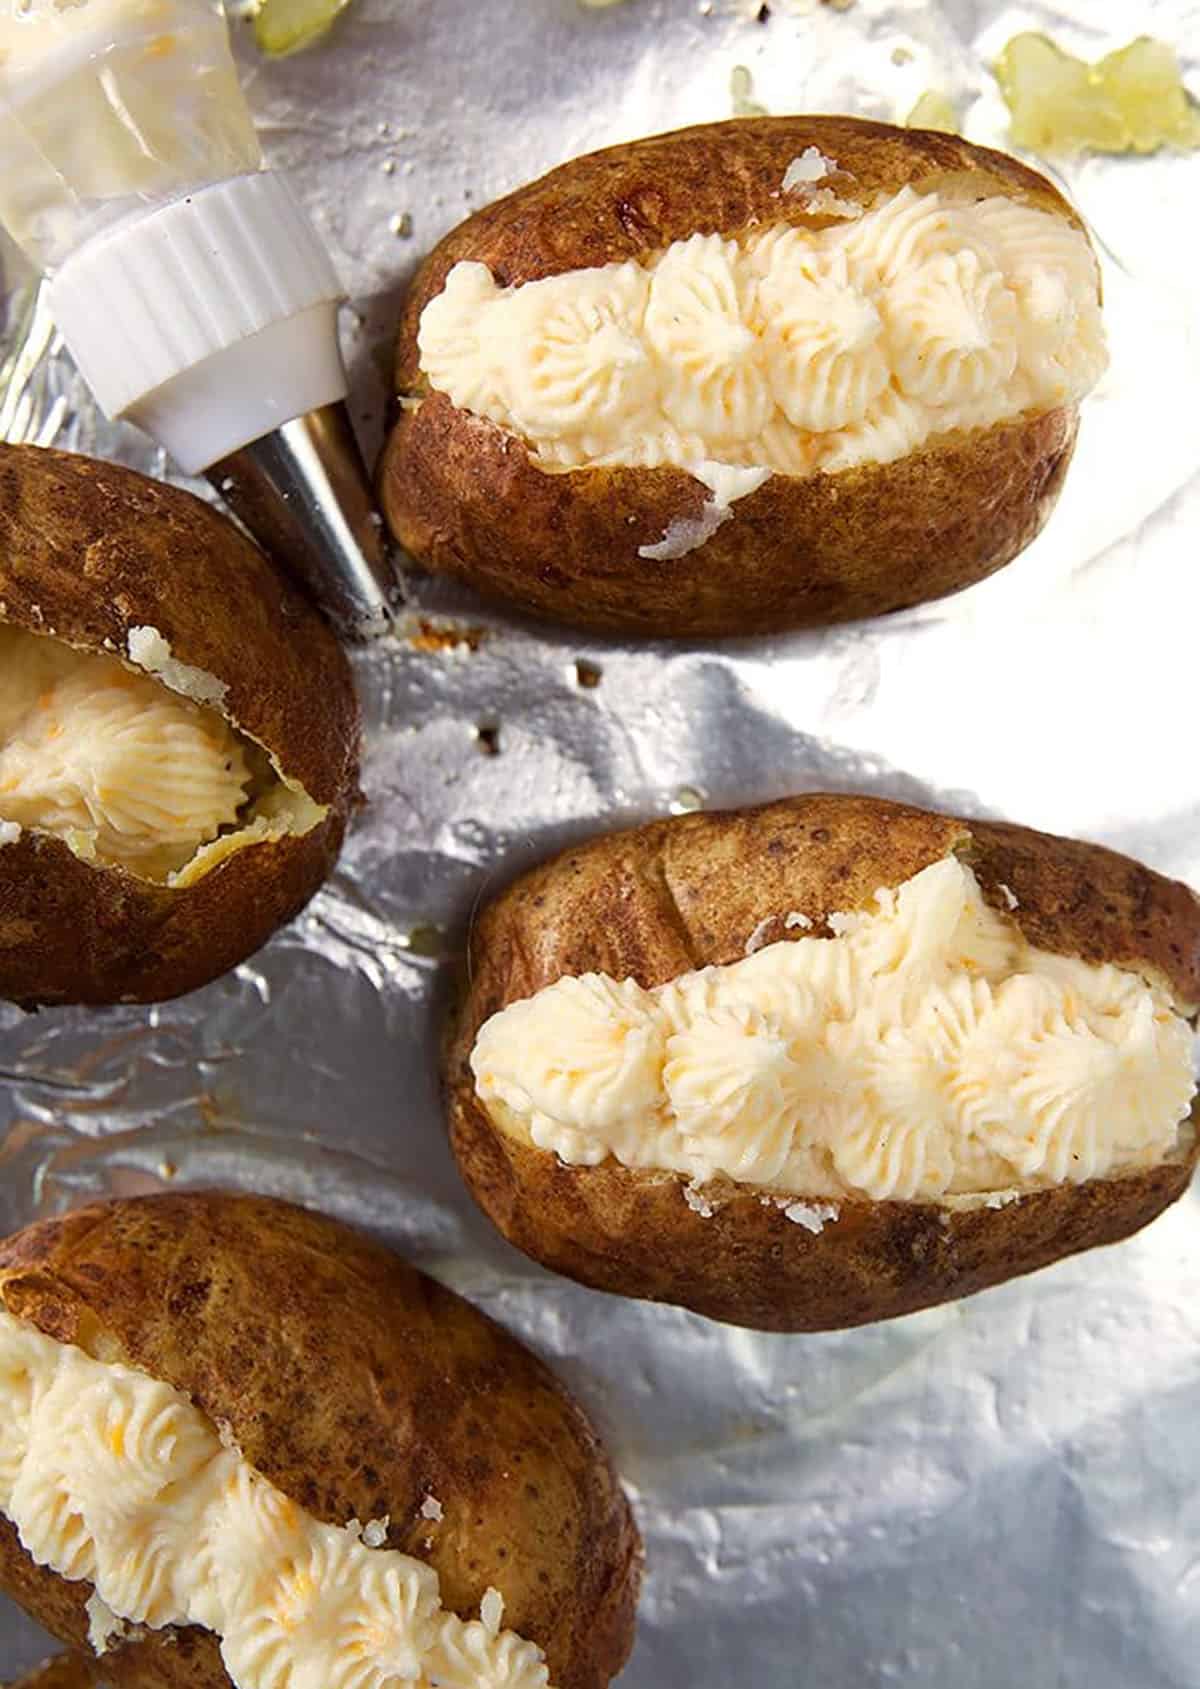 Twice Baked Potatoes filled with potato filling before being baked for the second time.